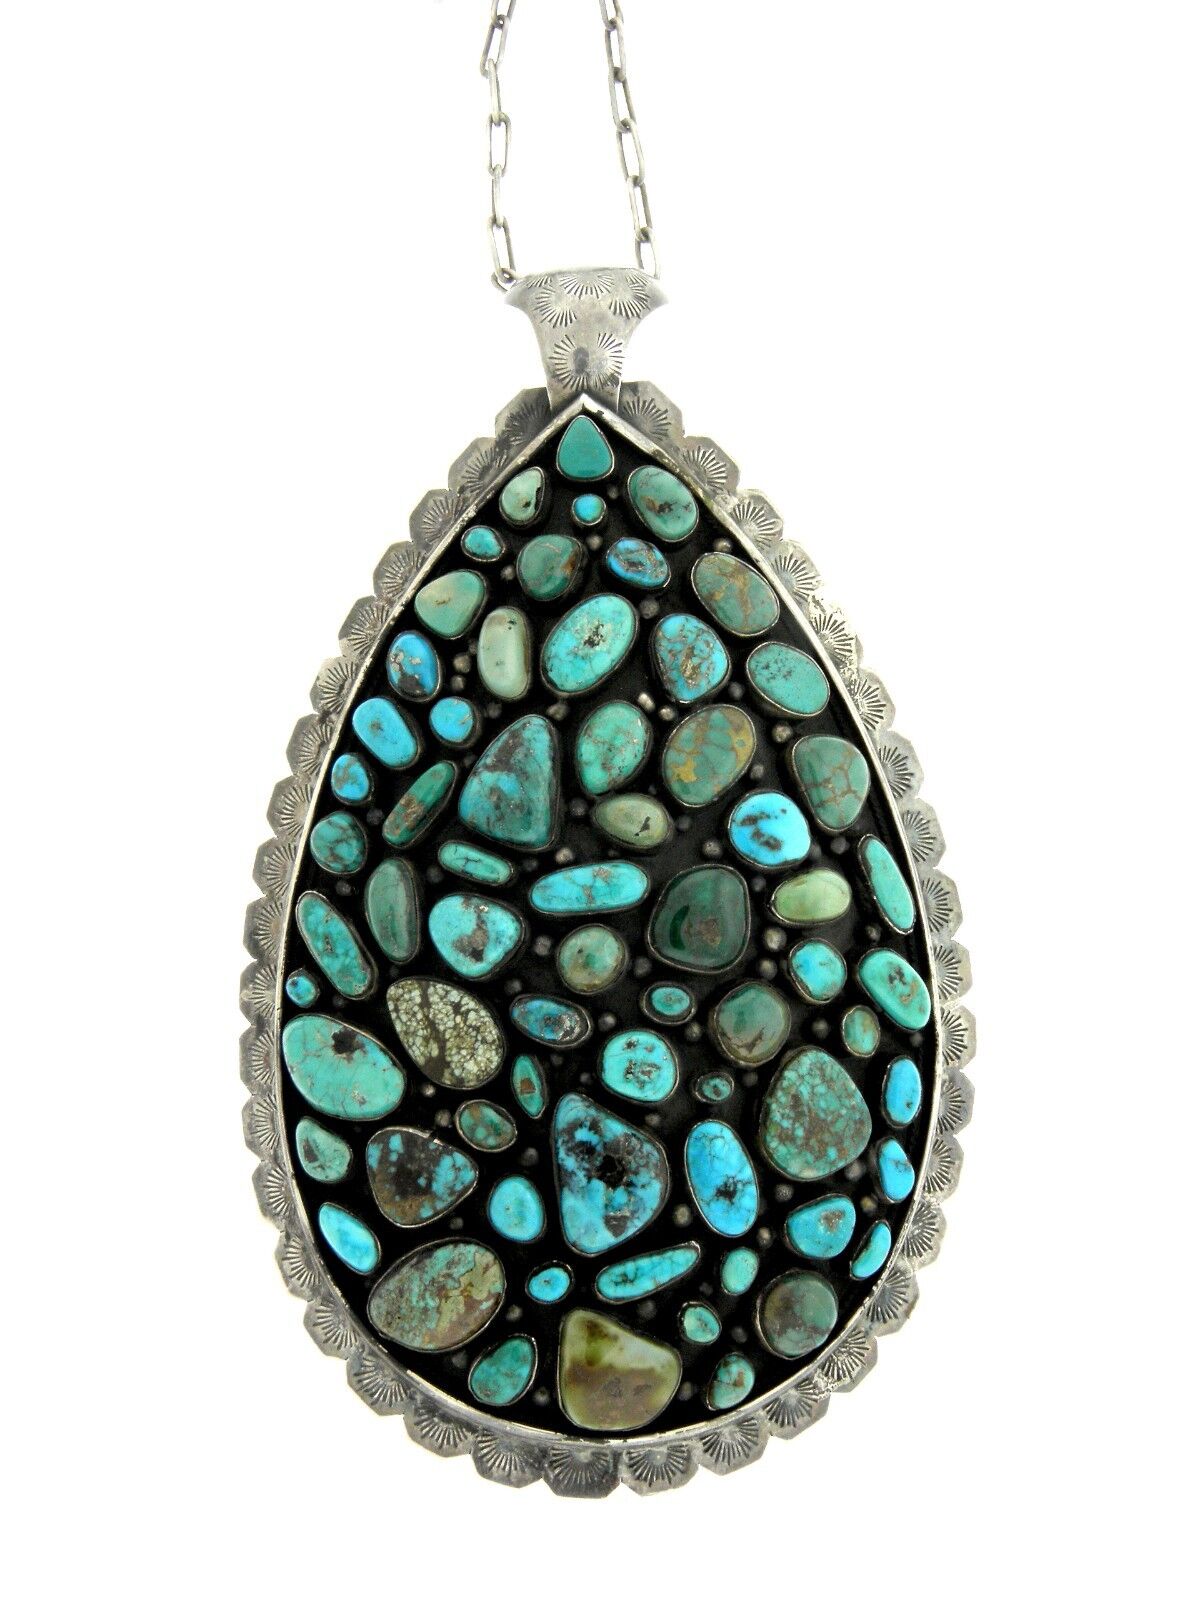 Amazing Massive Navajo Sterling Silver Turquoise Mosaic Pendant Necklace